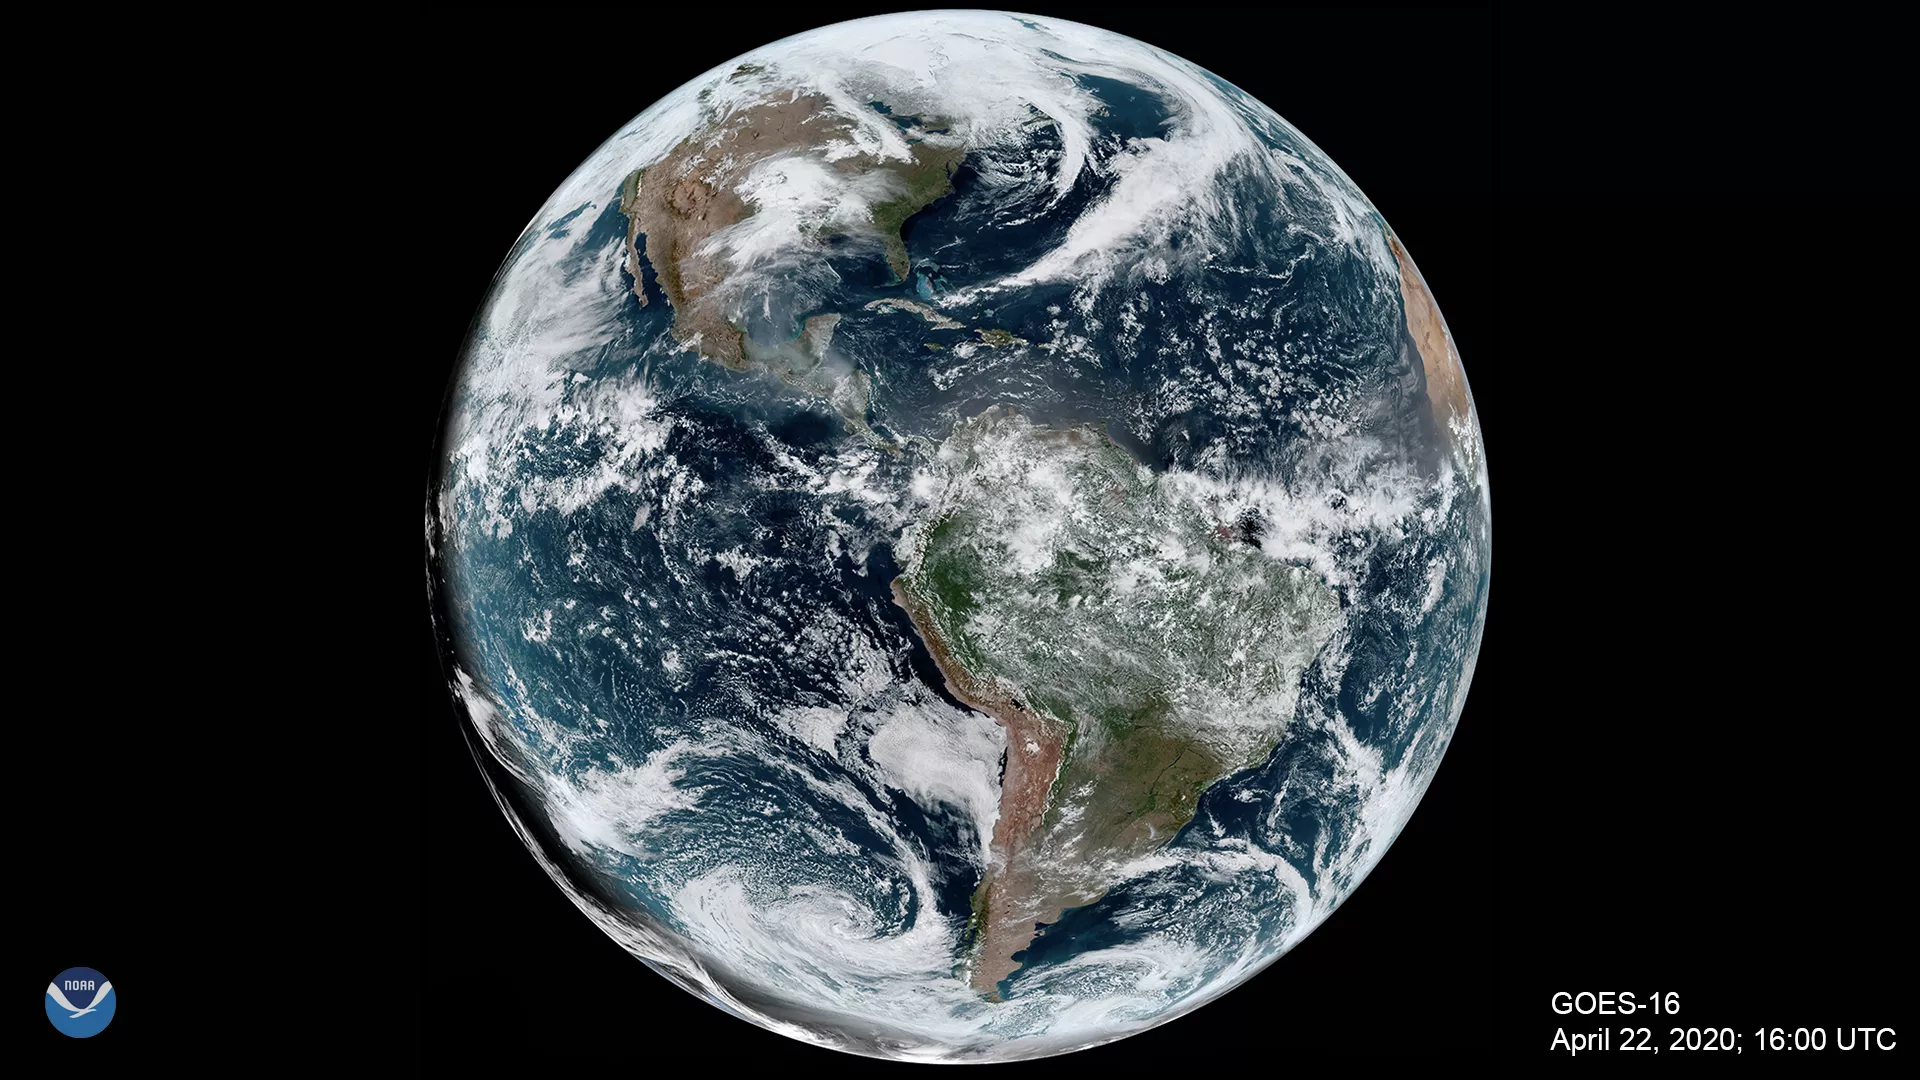 Image of the earth taken from the GOES-16 satellite.